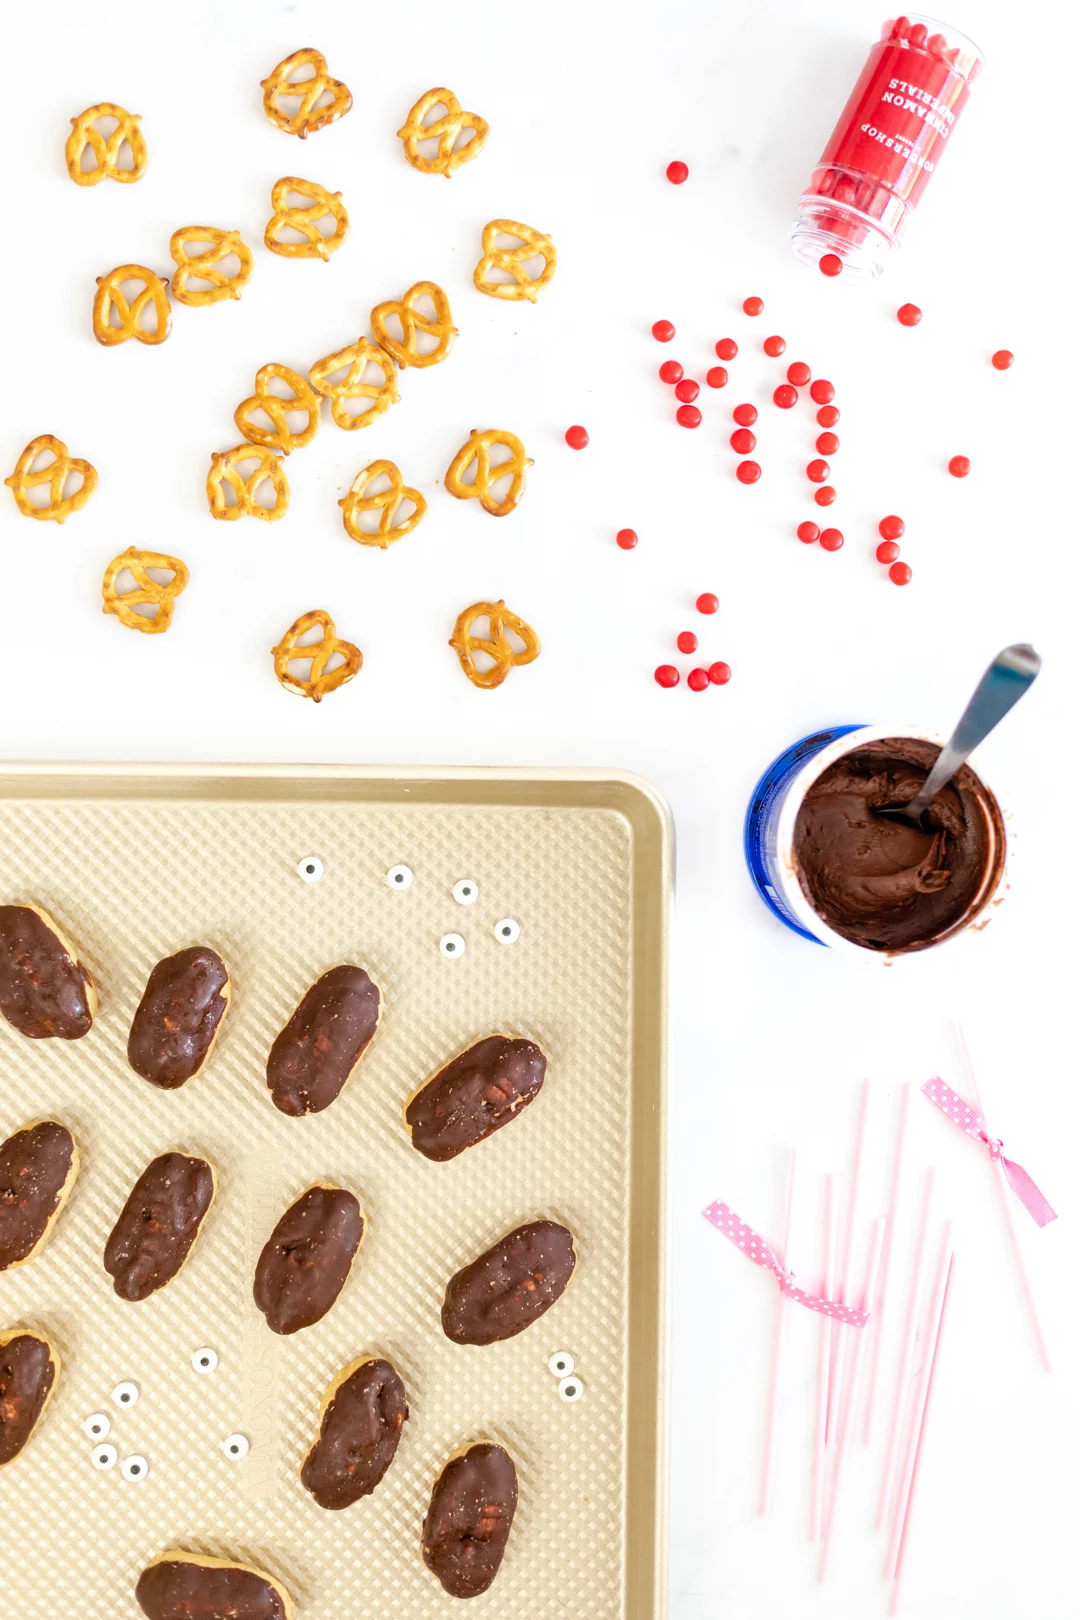 DIY Reindeer Lollipops with pretzels, candy and chocolate frosting.